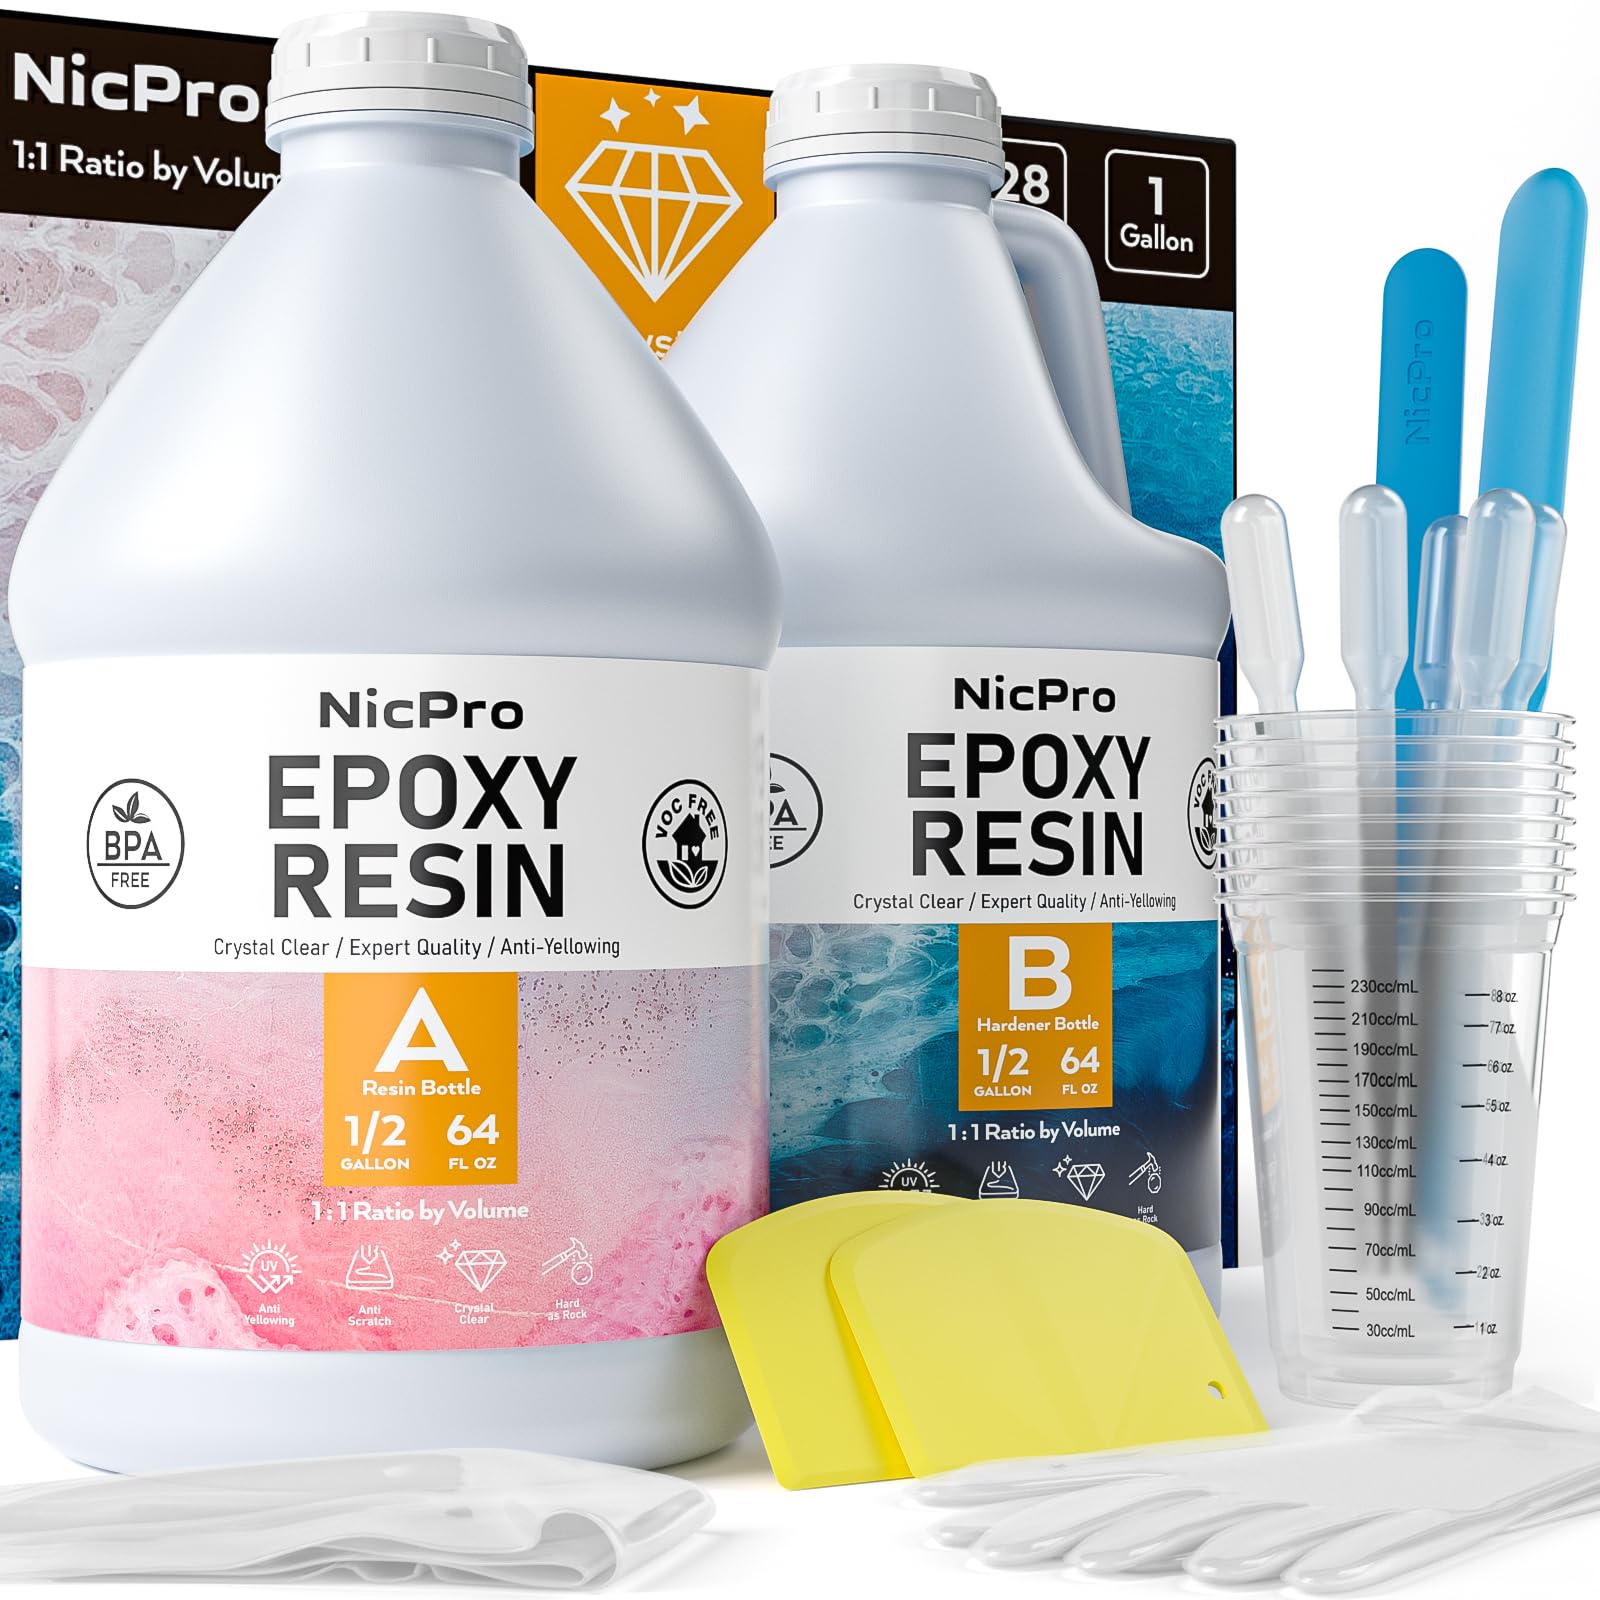 Nicpro 1 Gallon Crystal Clear Epoxy Resin Kit, High Gloss & Bubbles Free Resin Supplies for Art Coating and Casting, Craft DIY, Wood, Tabletop, Bar Top, Molds, River Tables with Cups, Sticks, Gloves